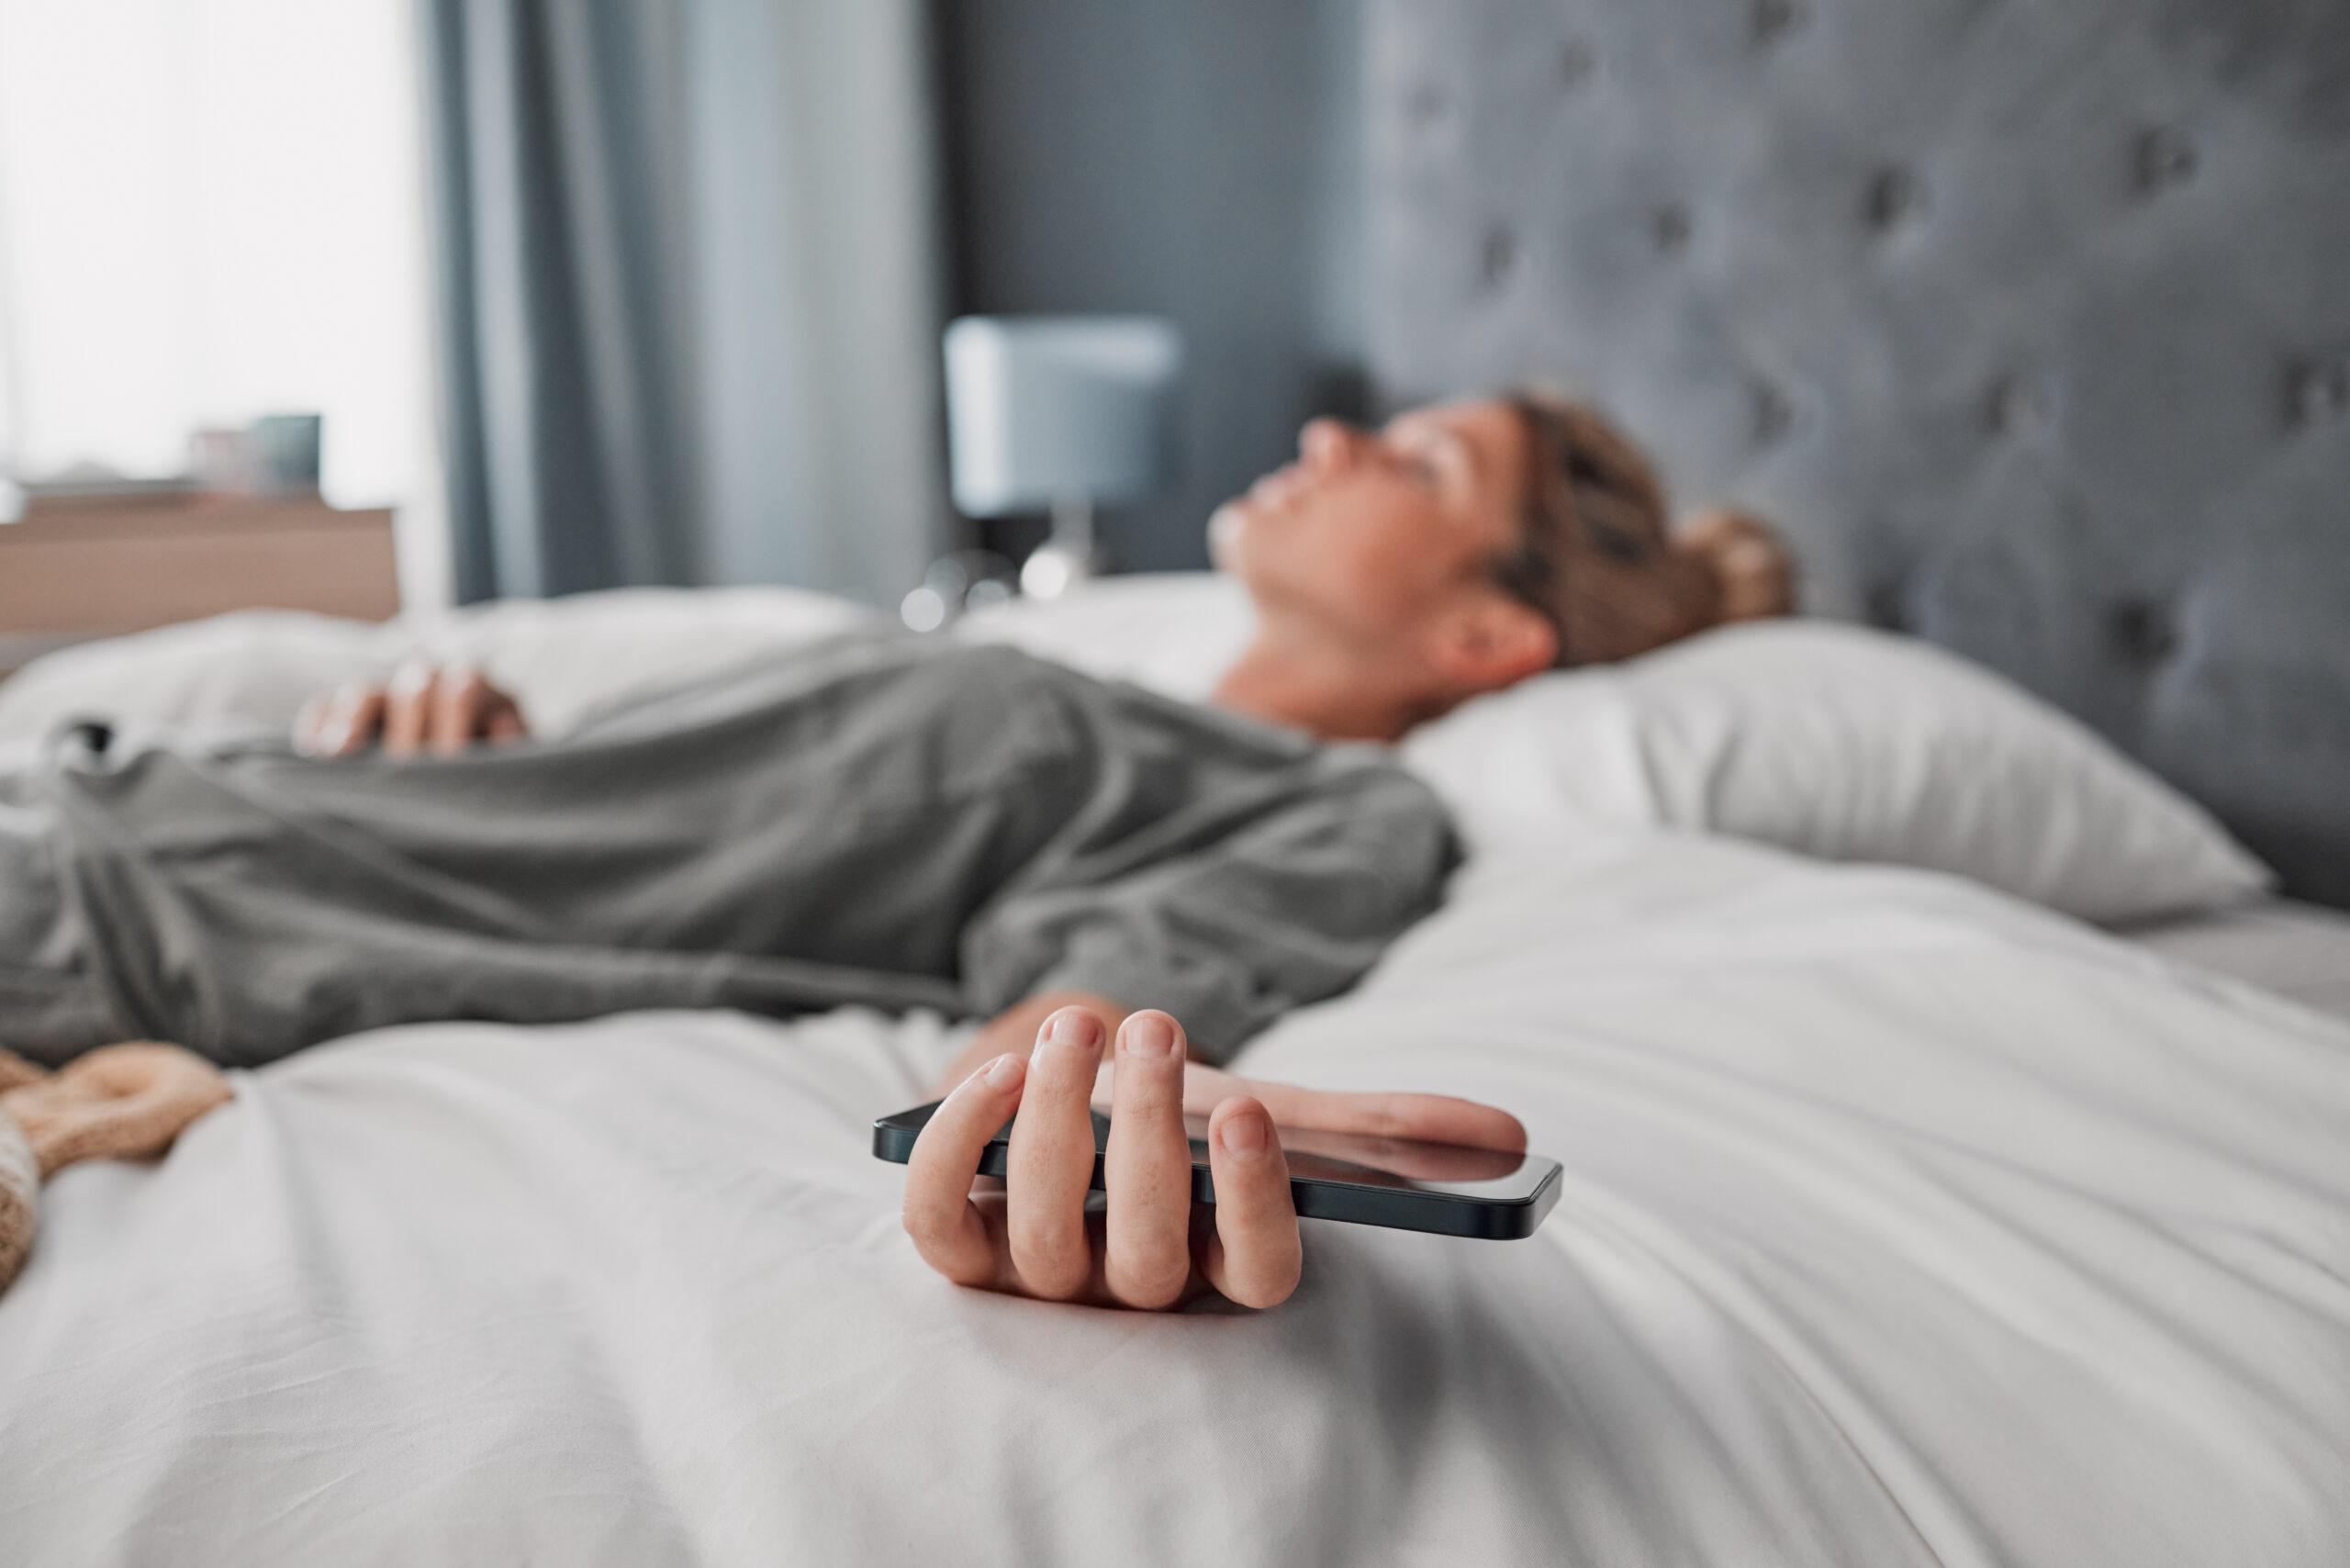 Woman lying on the bed, phone in hand, not listening or messaging anymore